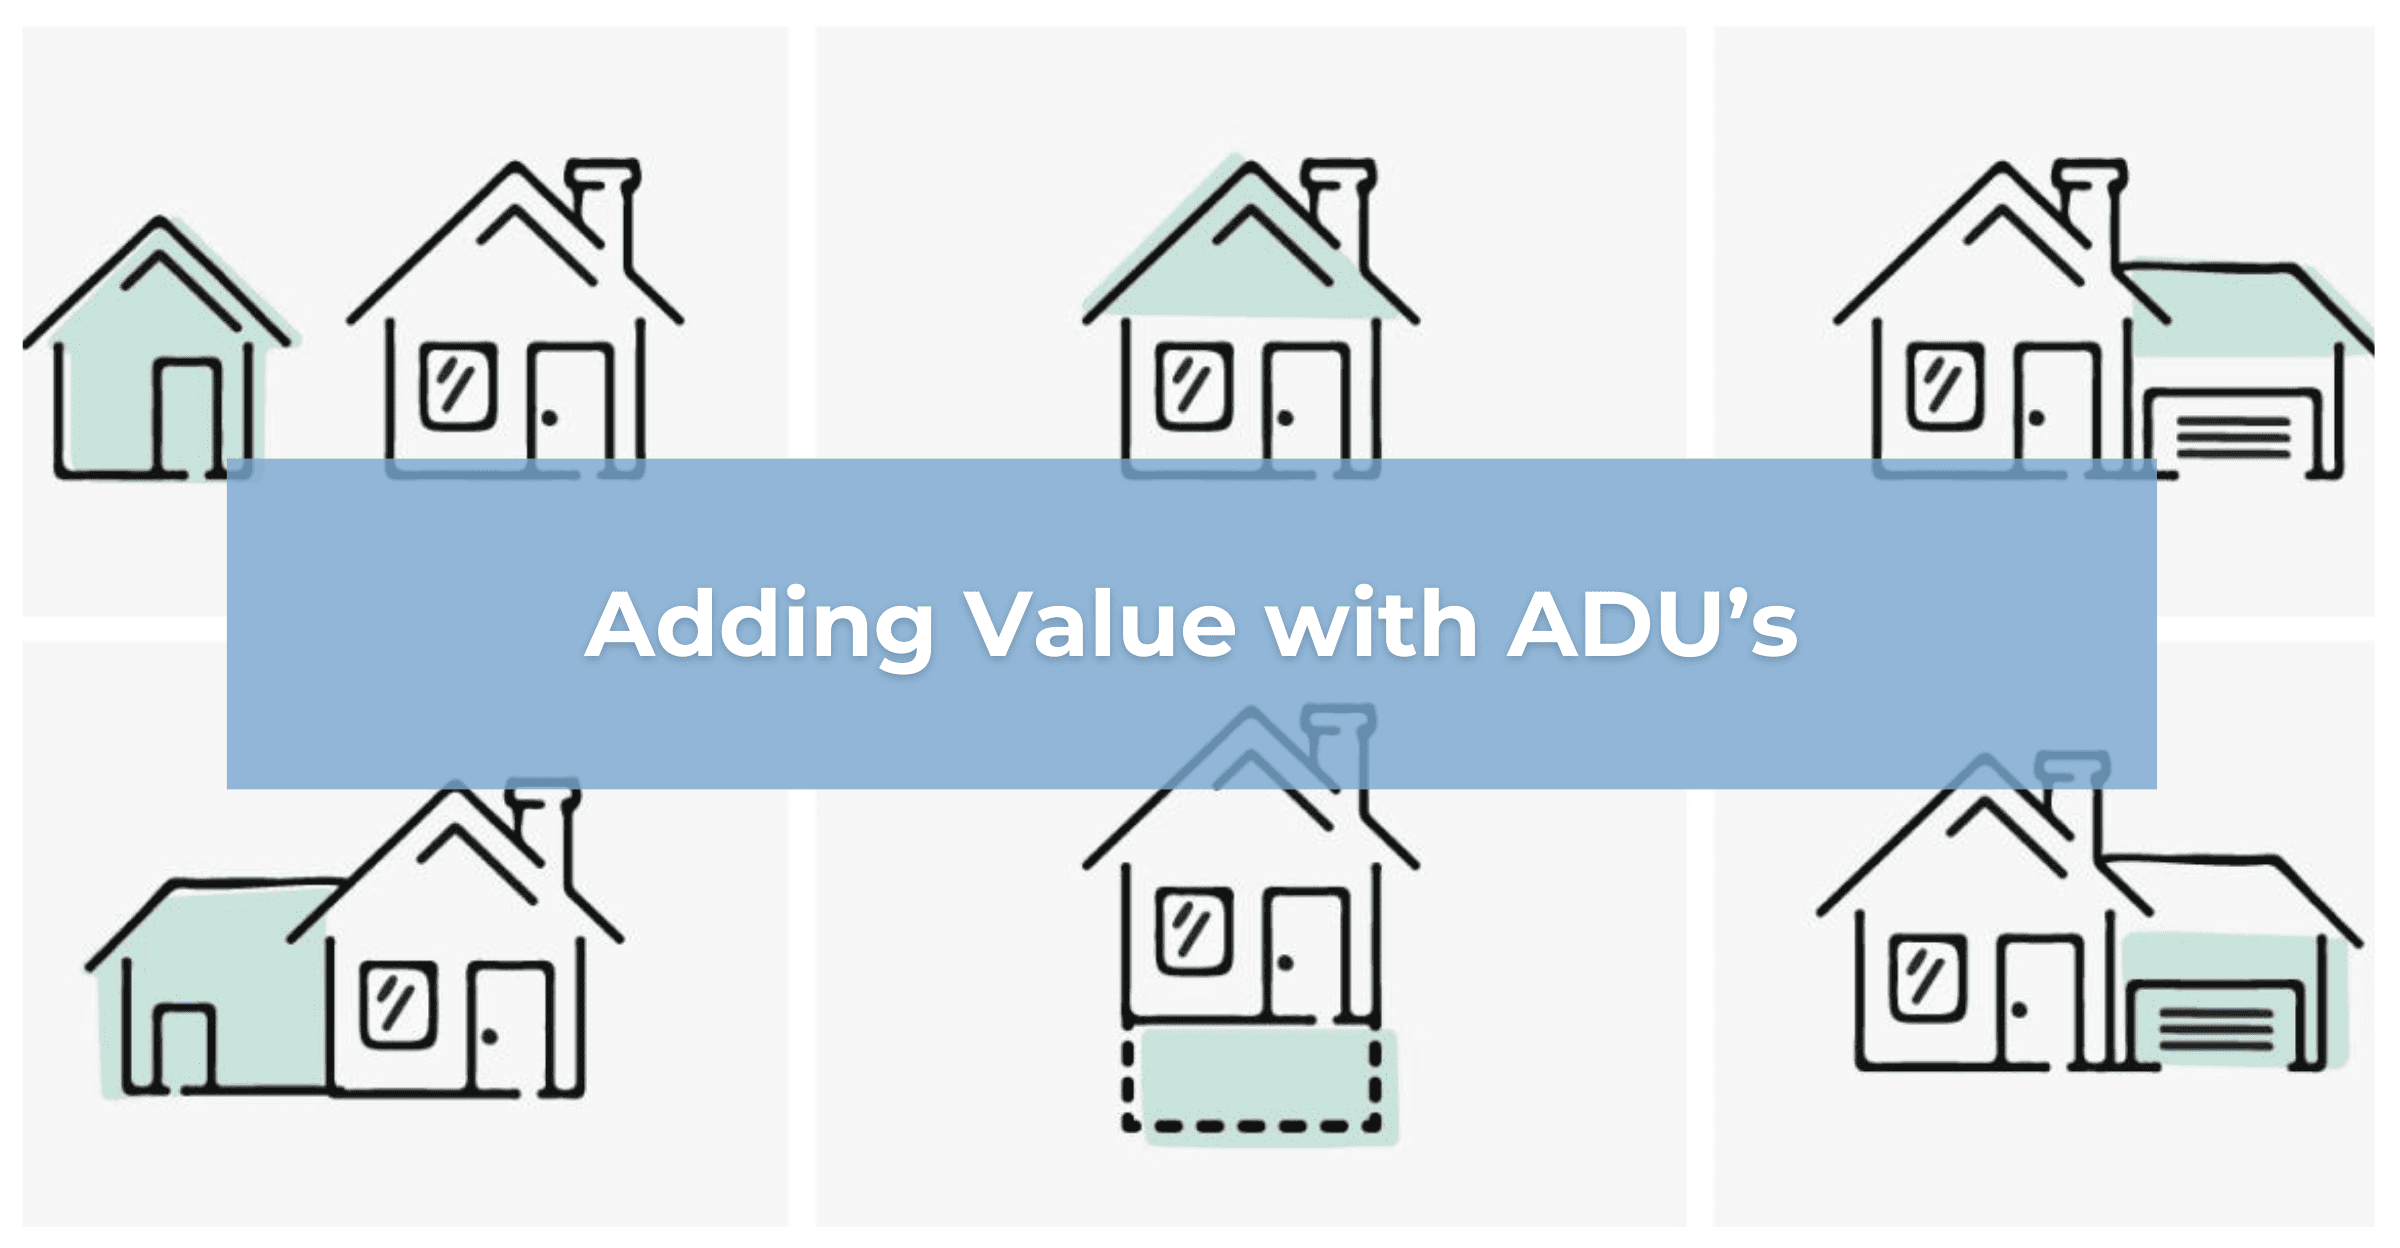 Accessory Dwelling Units add value to a property and can provide rental income for homeowners.